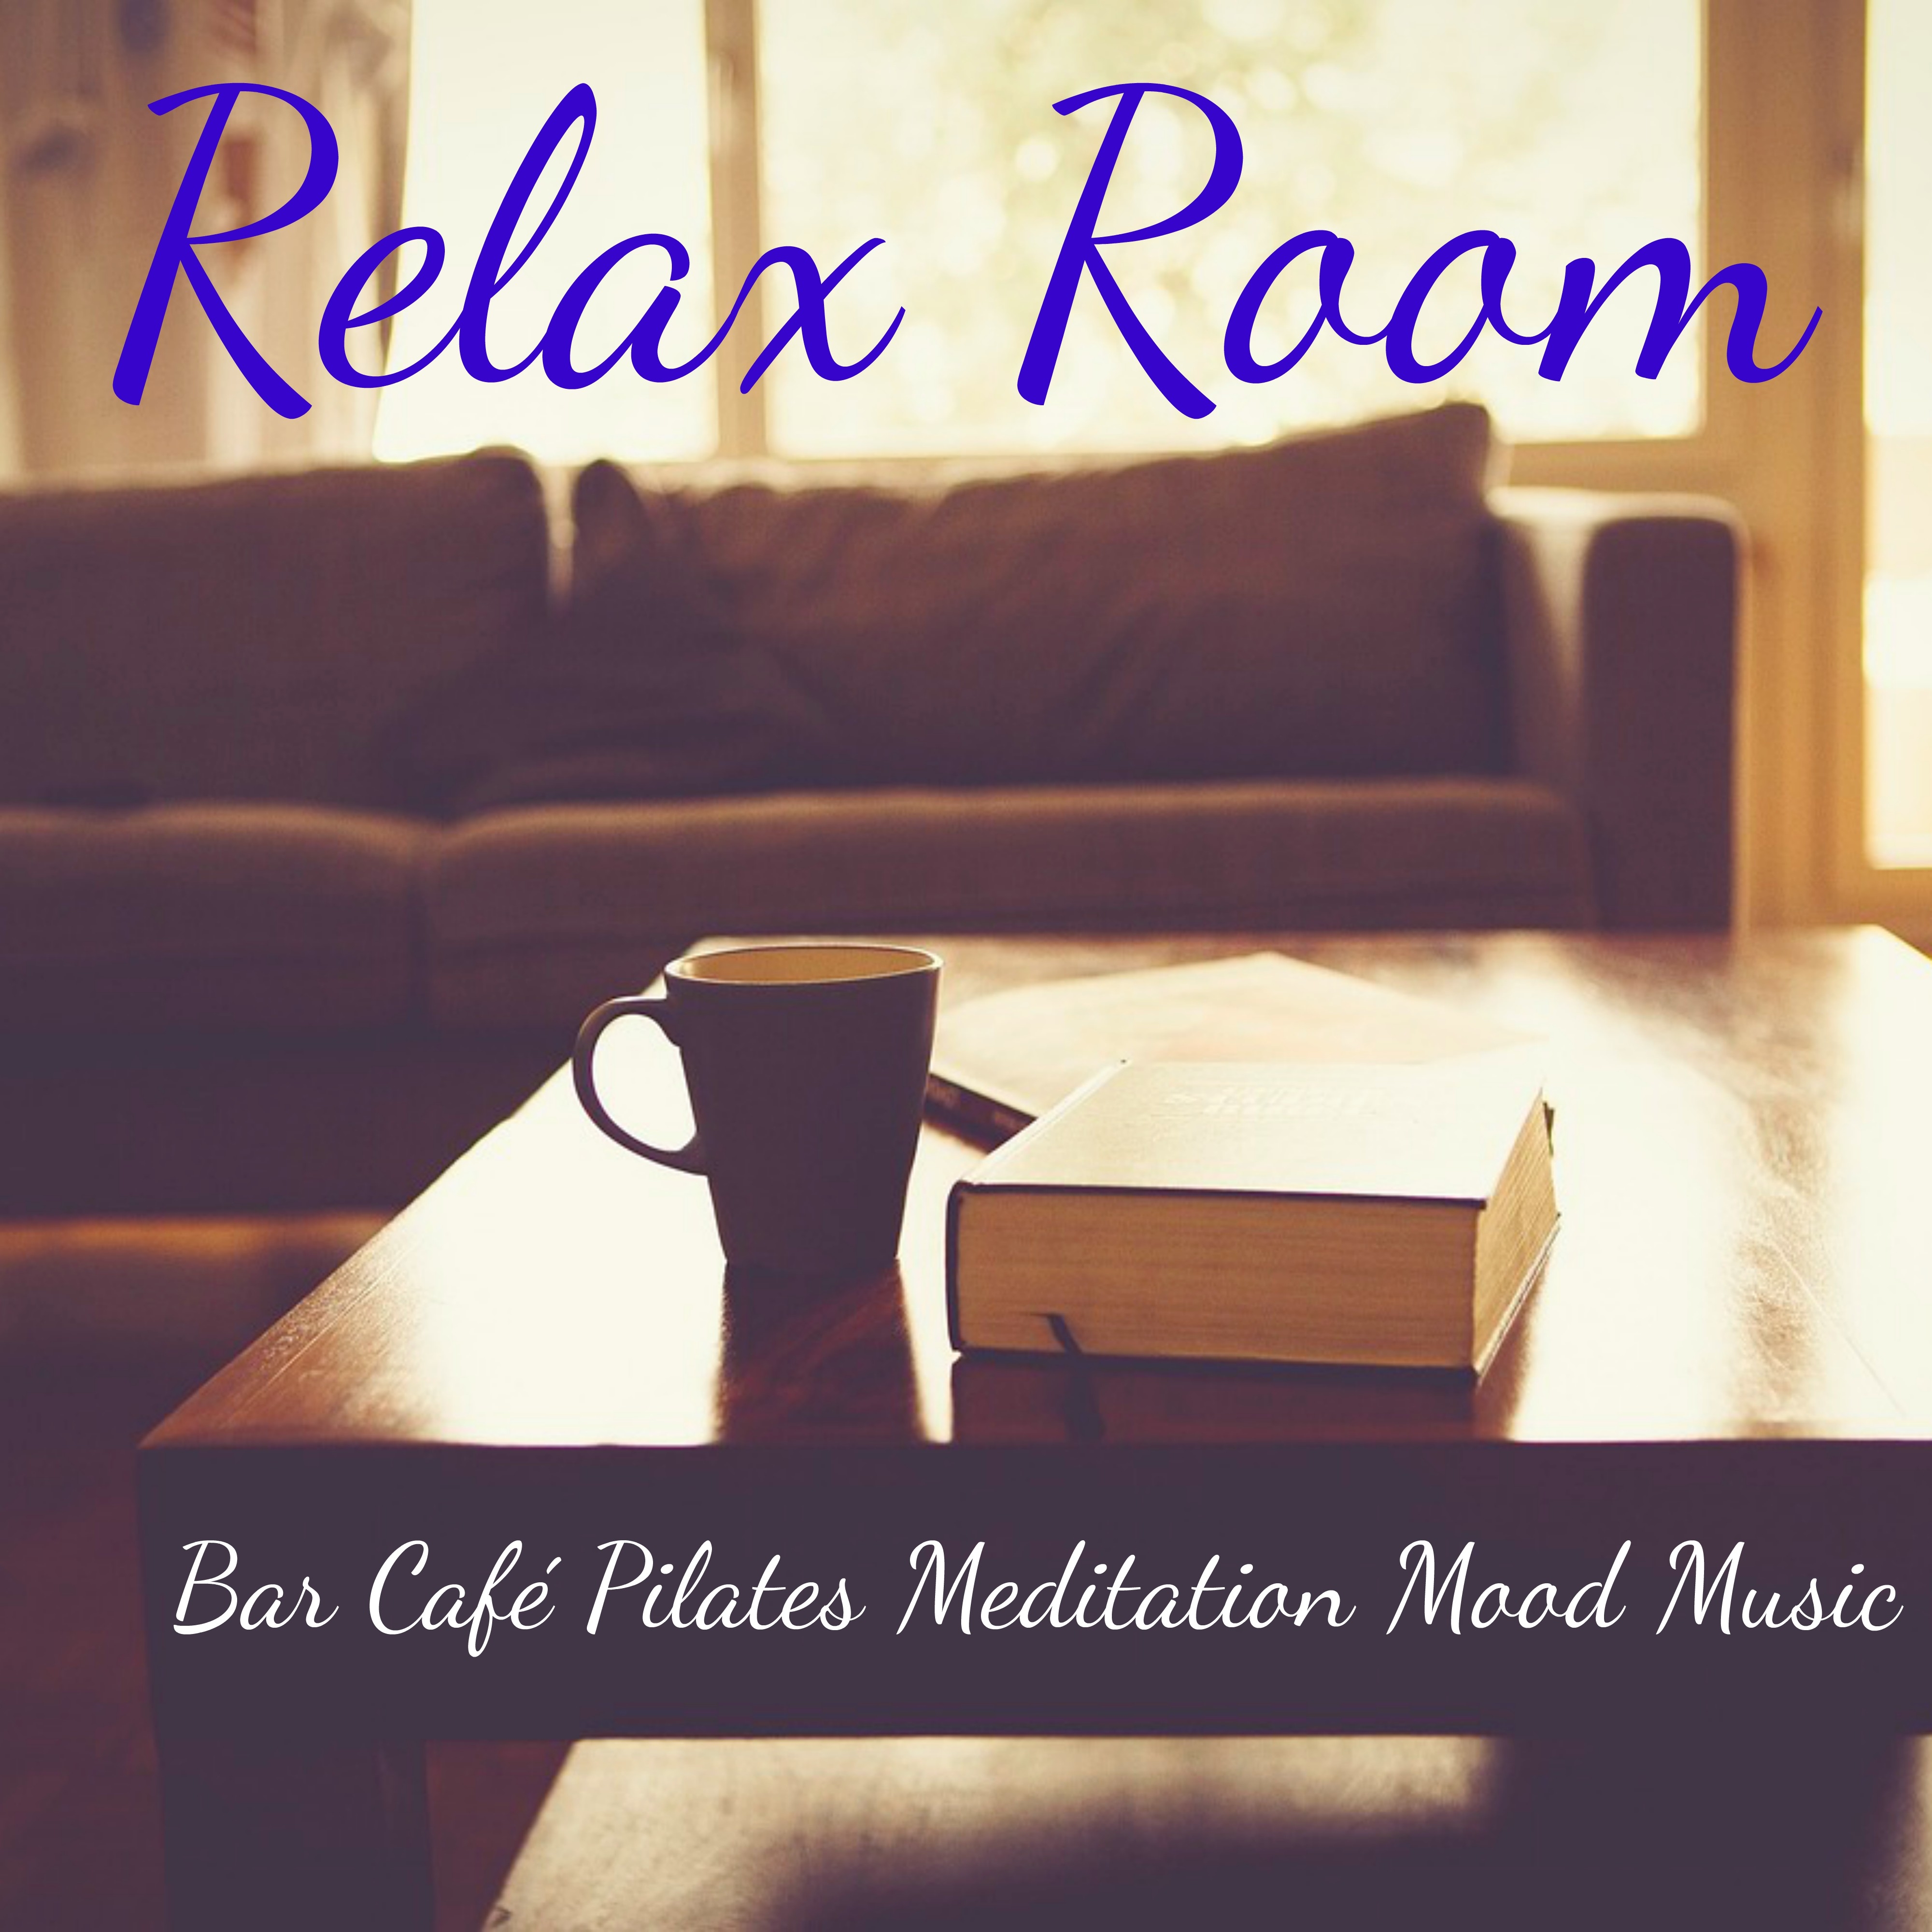 Relax Room - Bar Café Pilates Meditation Mood Music with Chillout Lounge Instrumental Sounds